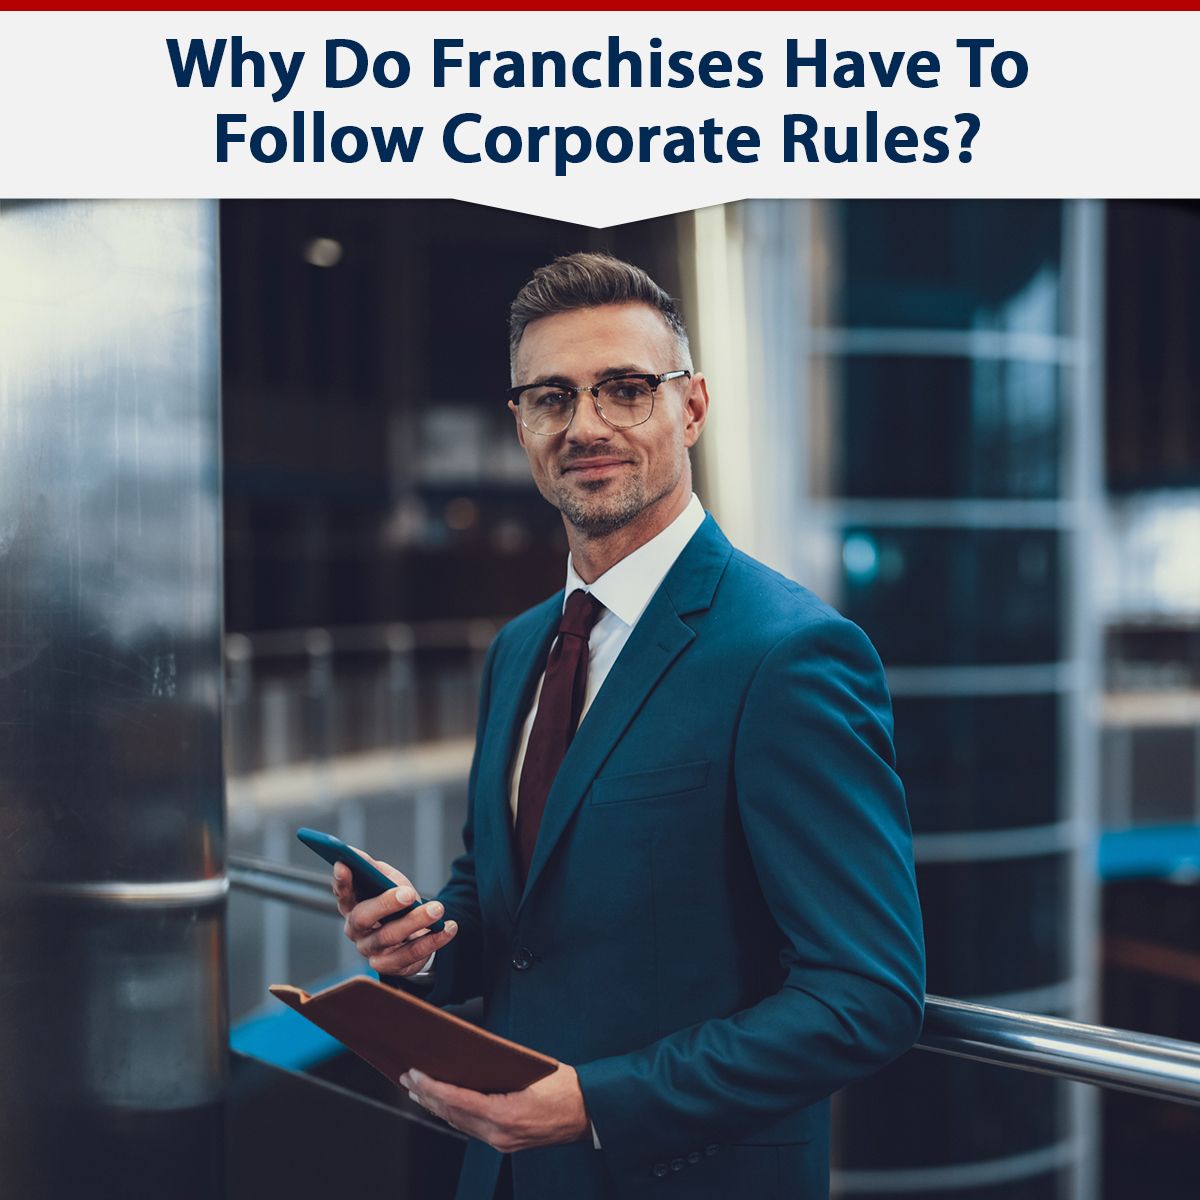 Why Do Franchises Have To Follow Corporate Rules?